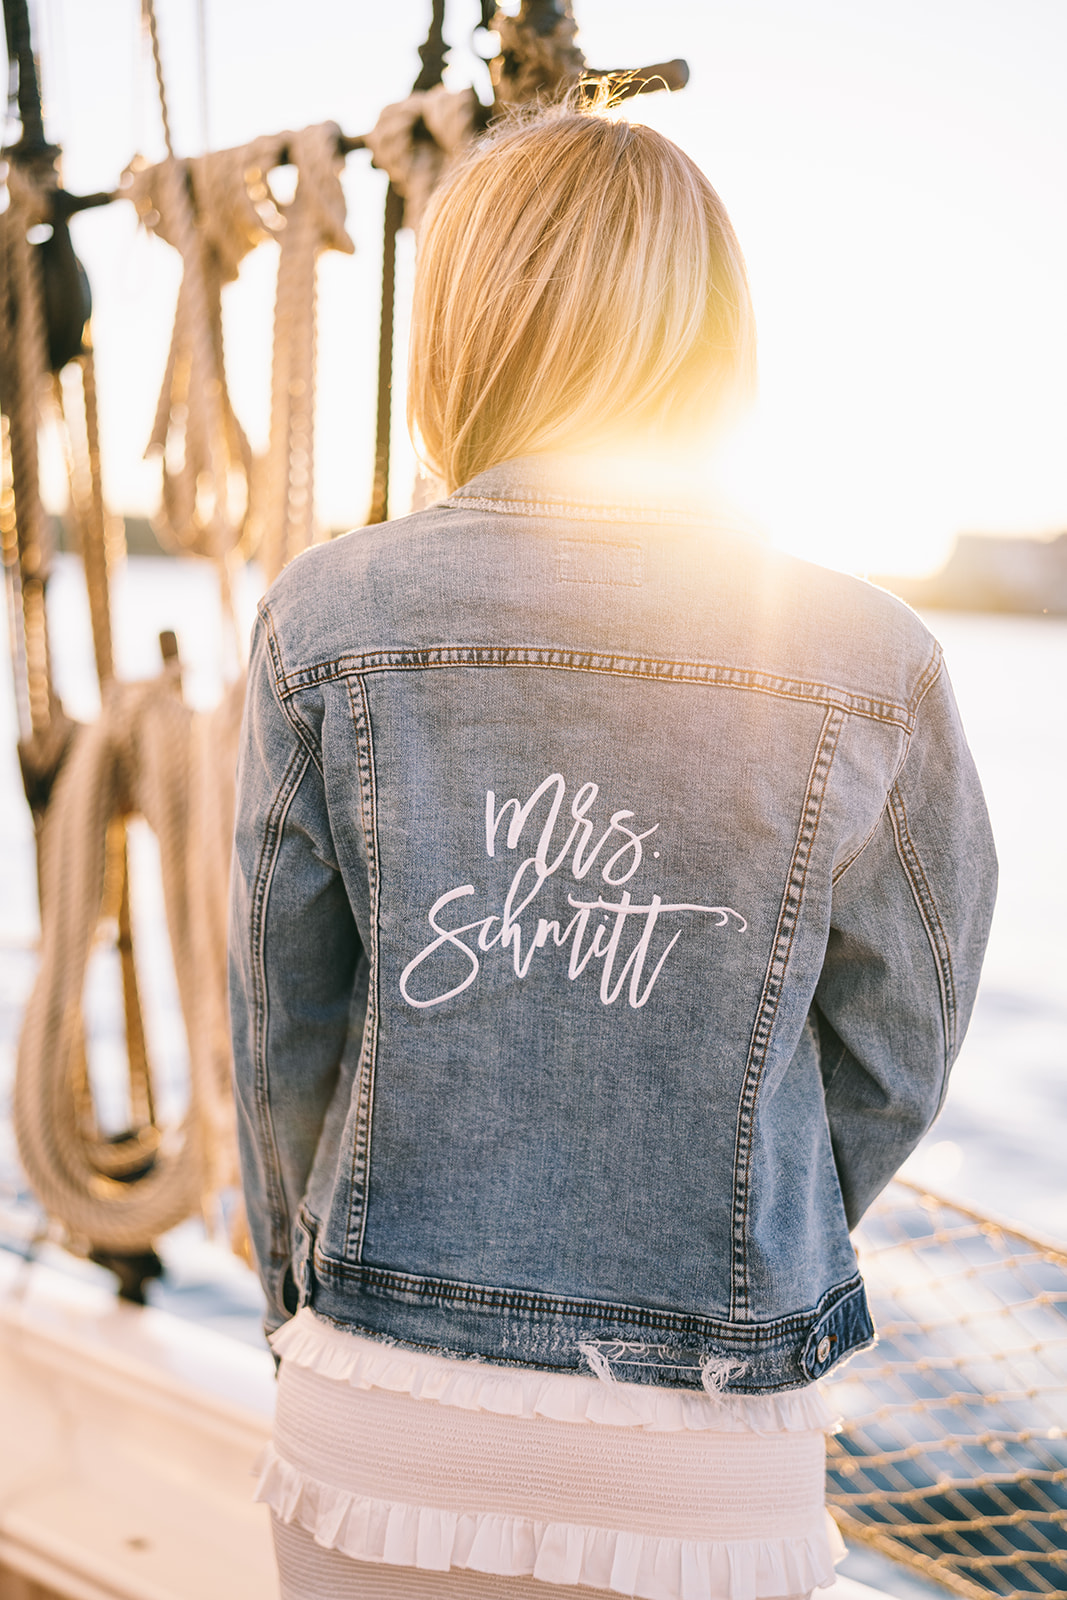 Woman wearing jean jacket that says 'Mrs. Schmitt' while the sun sets on welcome dinner sail